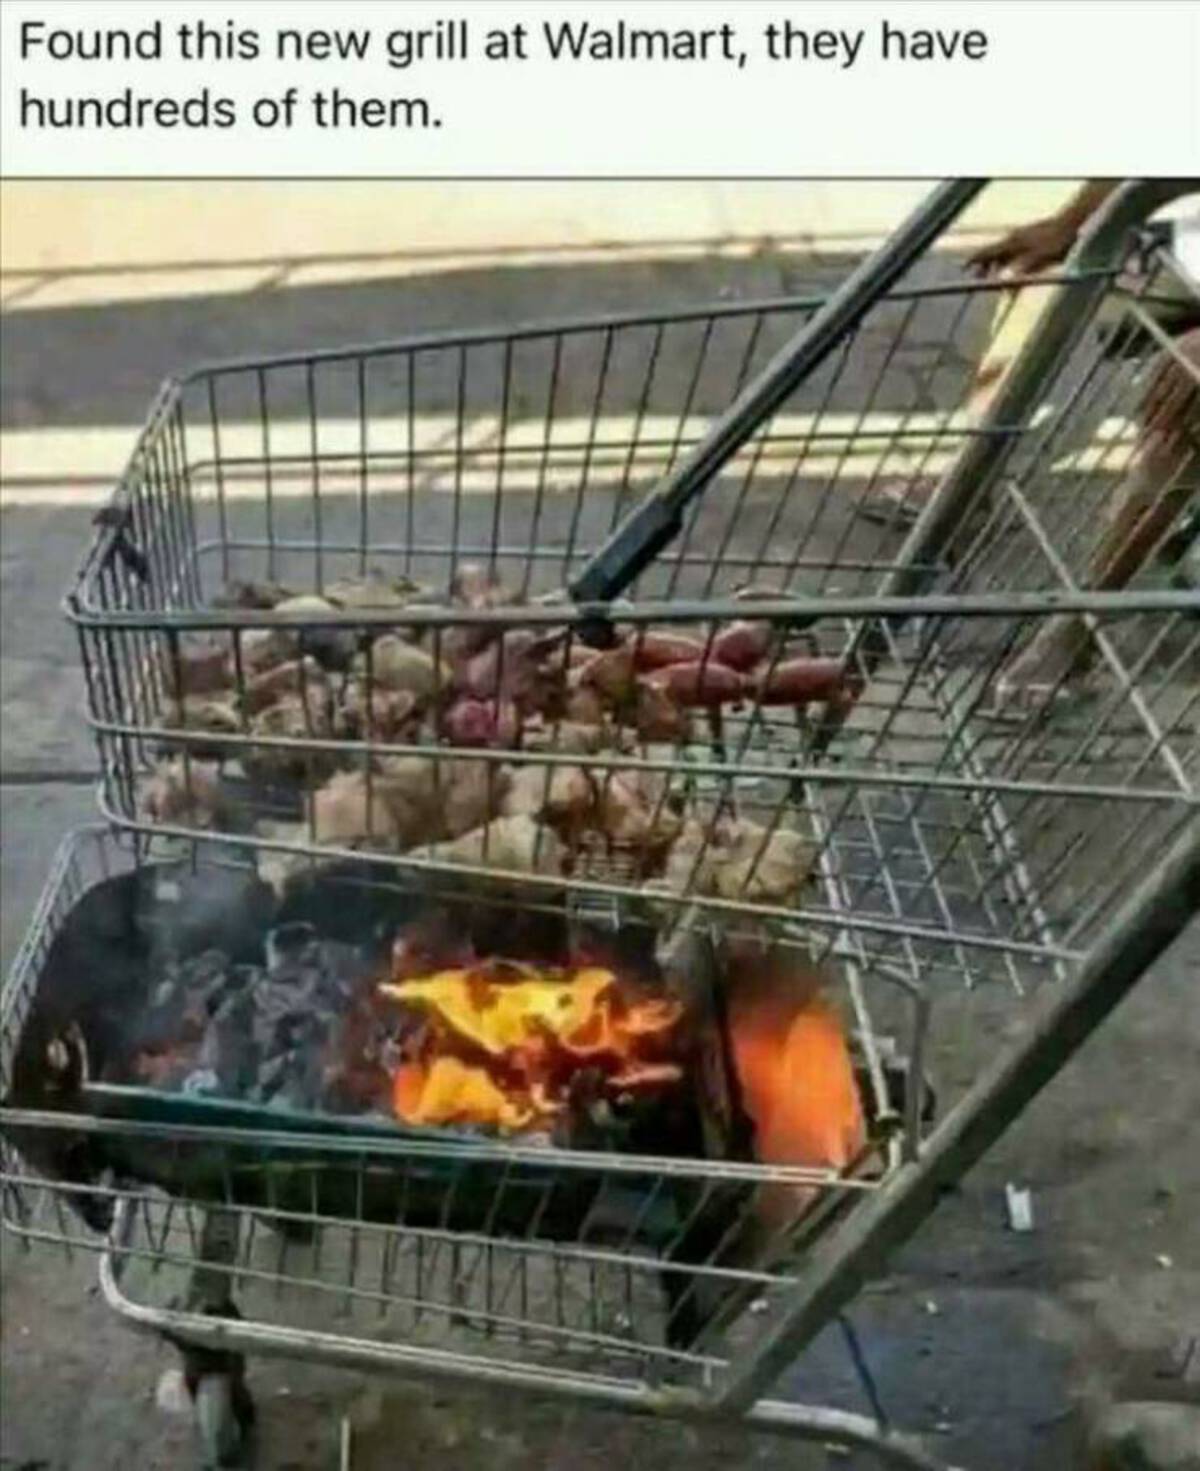 grilling - Found this new grill at Walmart, they have hundreds of them.